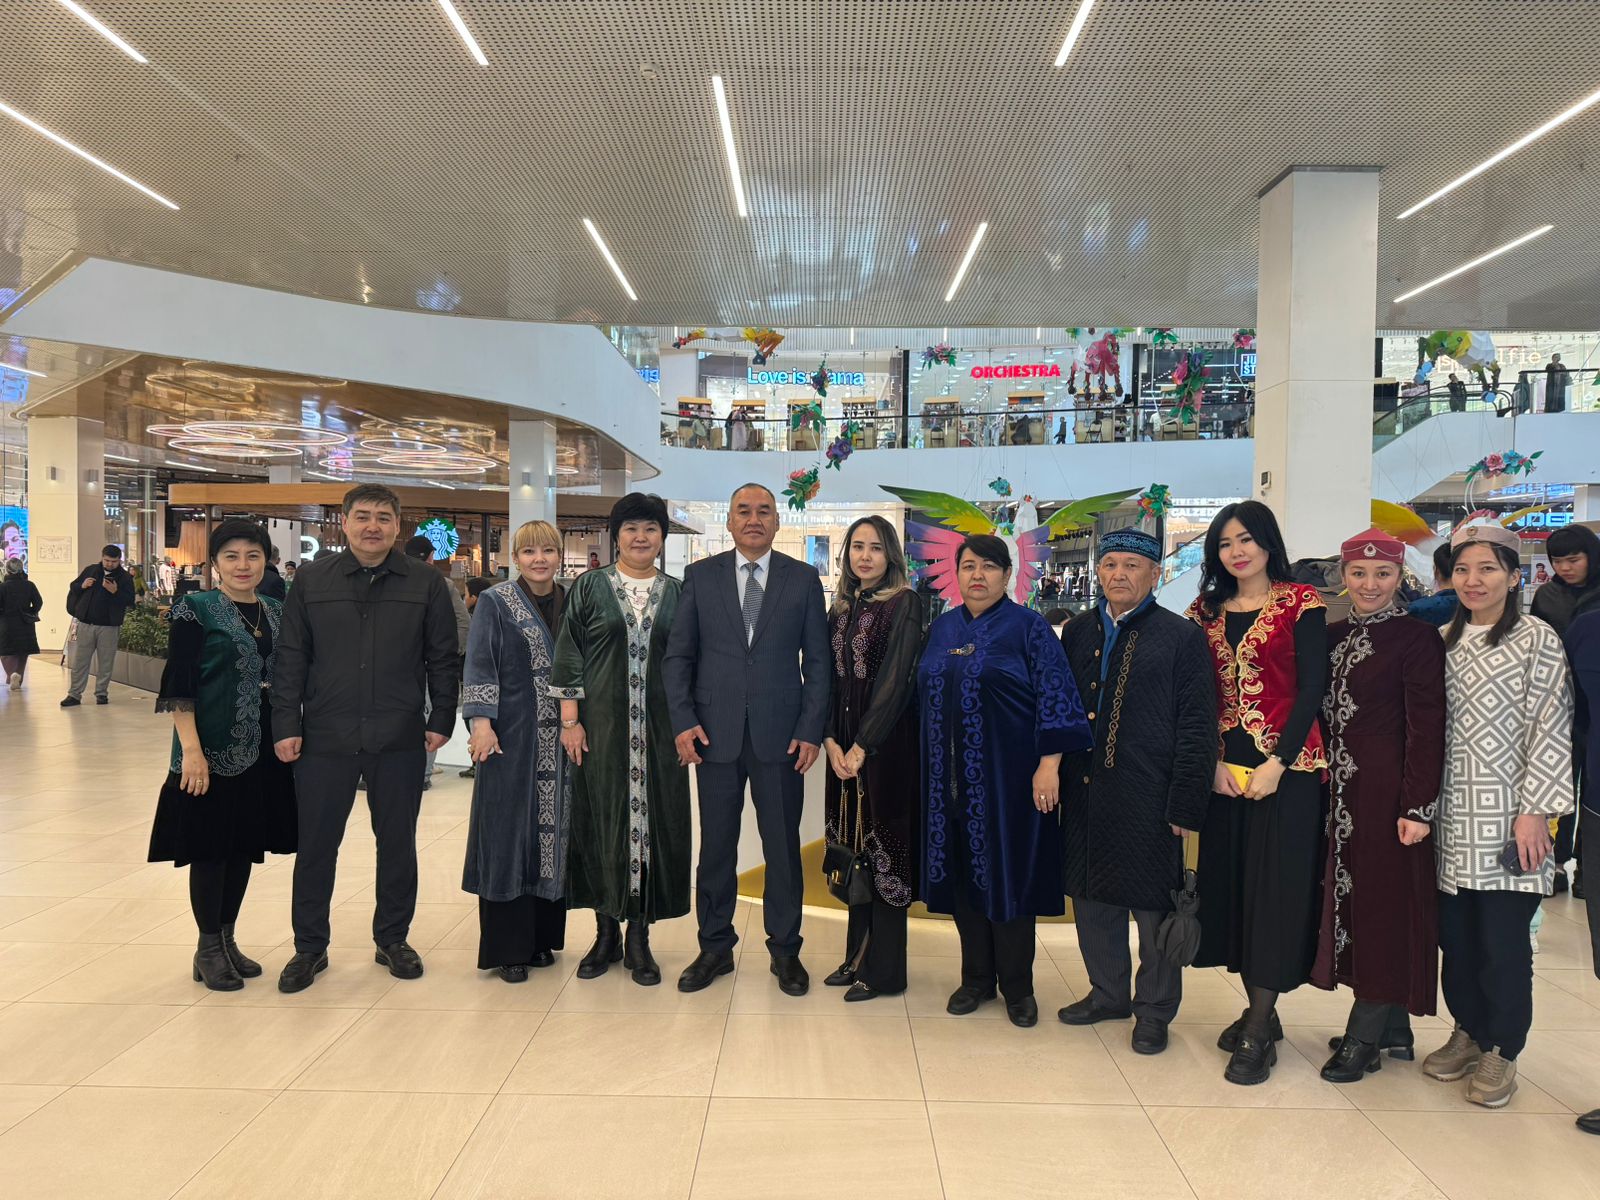 The staff of the Agrarian Faculty took part in the celebration of Zhyl Basy